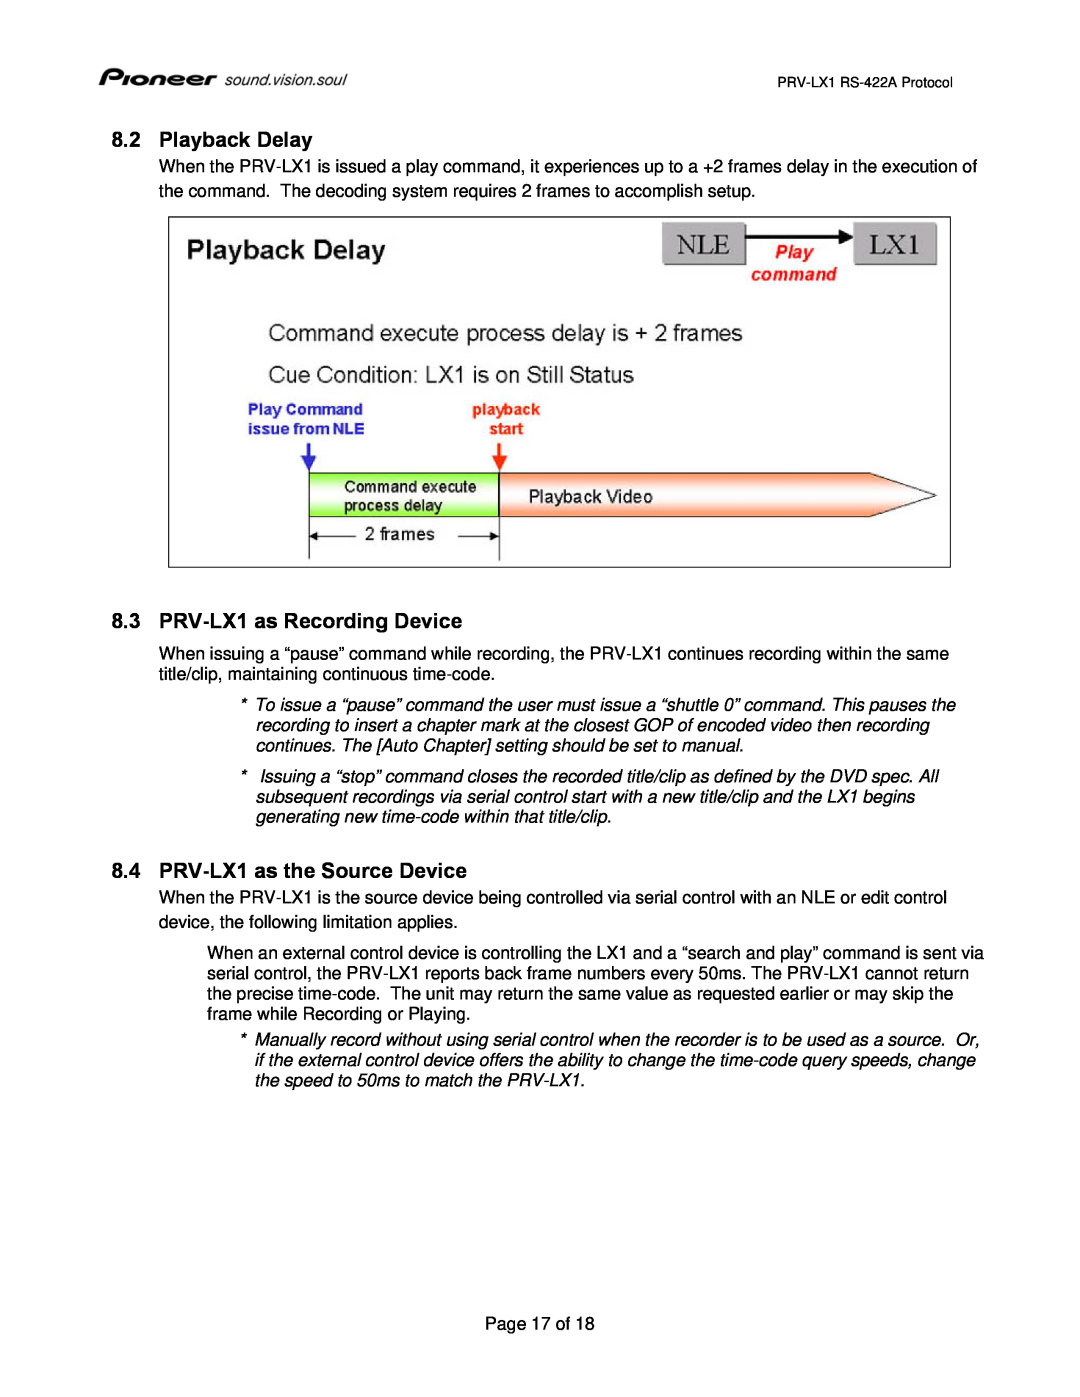 Pioneer manual Playback Delay, PRV-LX1as Recording Device, 8.4PRV-LX1as the Source Device 